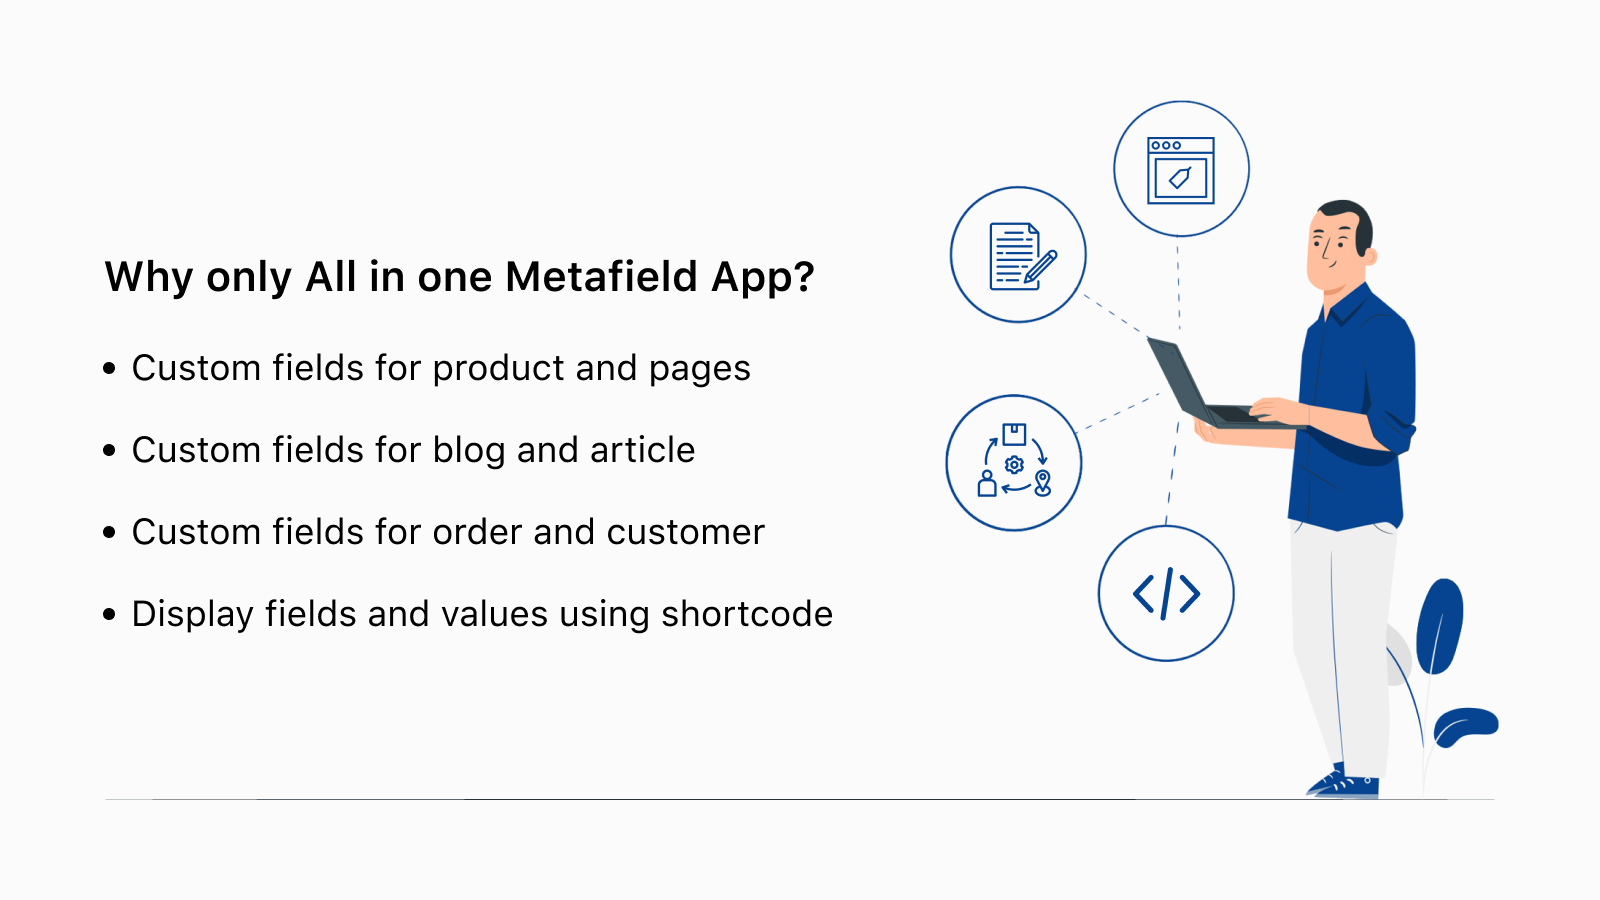 All in one metafields, Field builder, product page, other pages